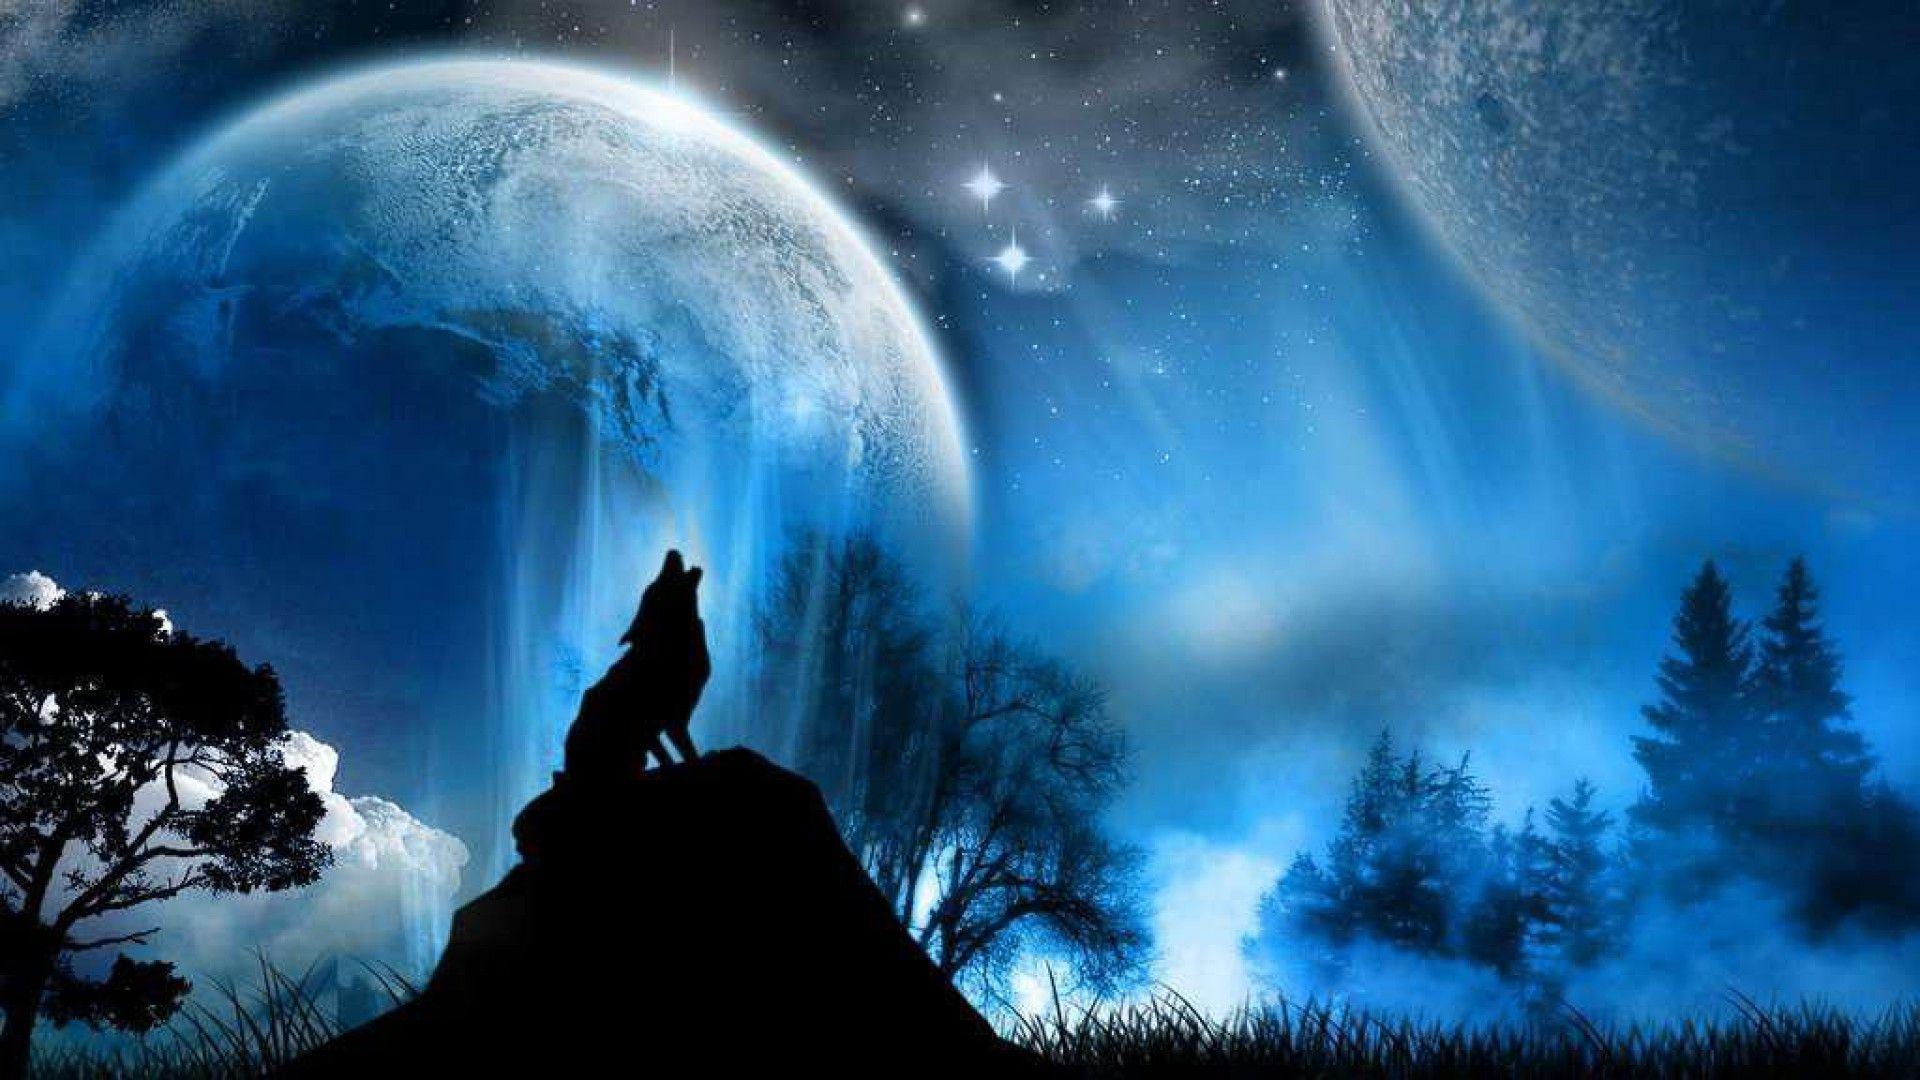 Wolf Wallpaper, HD Wolf Wallpaper and Photo. View HDQ